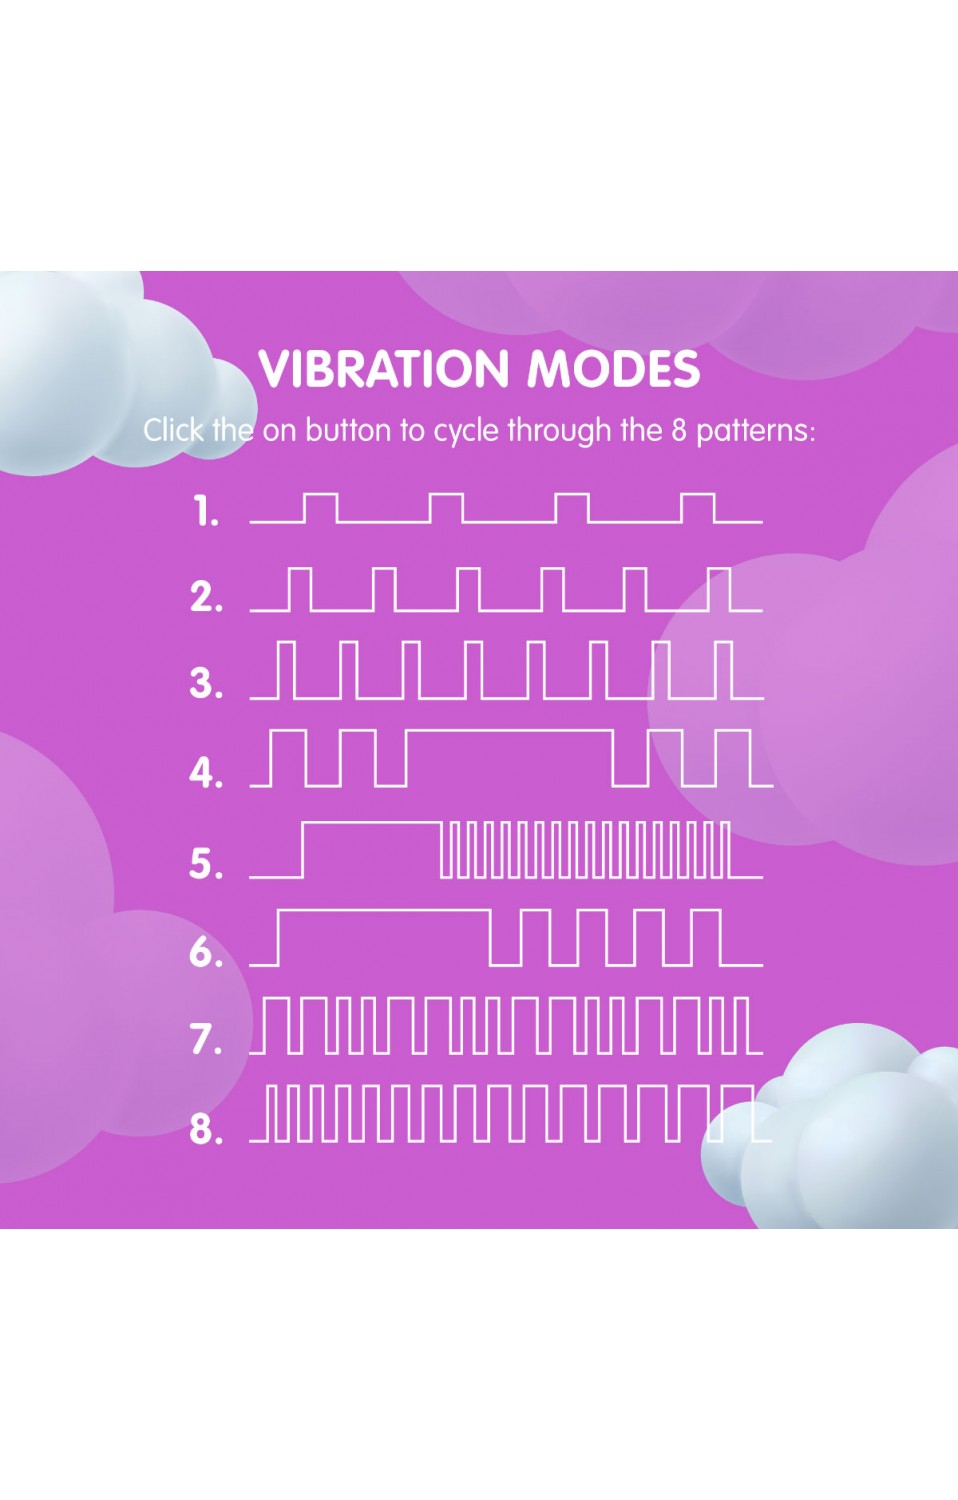 An illustration of the vibrating modes of the Skins Touch The Glee Spot Vibrator.